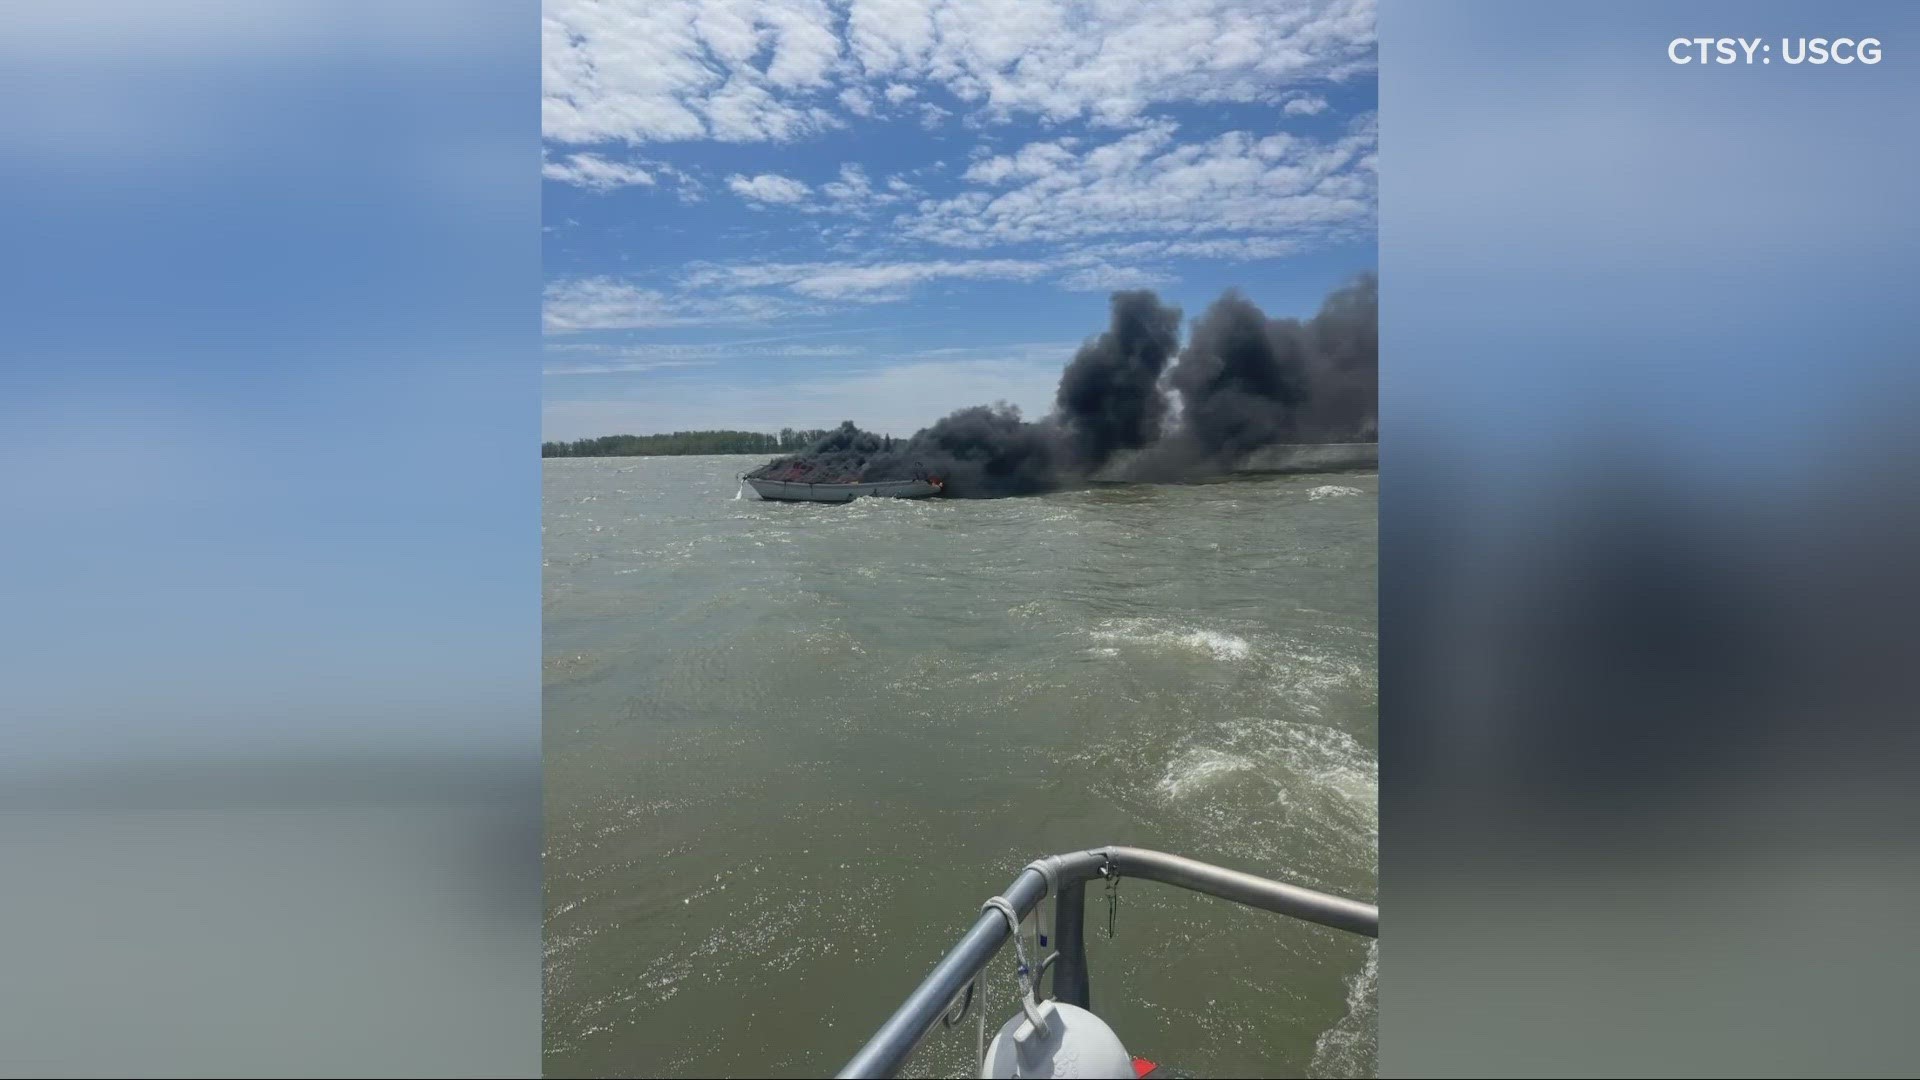 The U.S. Coast Guard says the 25' vessel became engulfed in flames on Sunday morning.